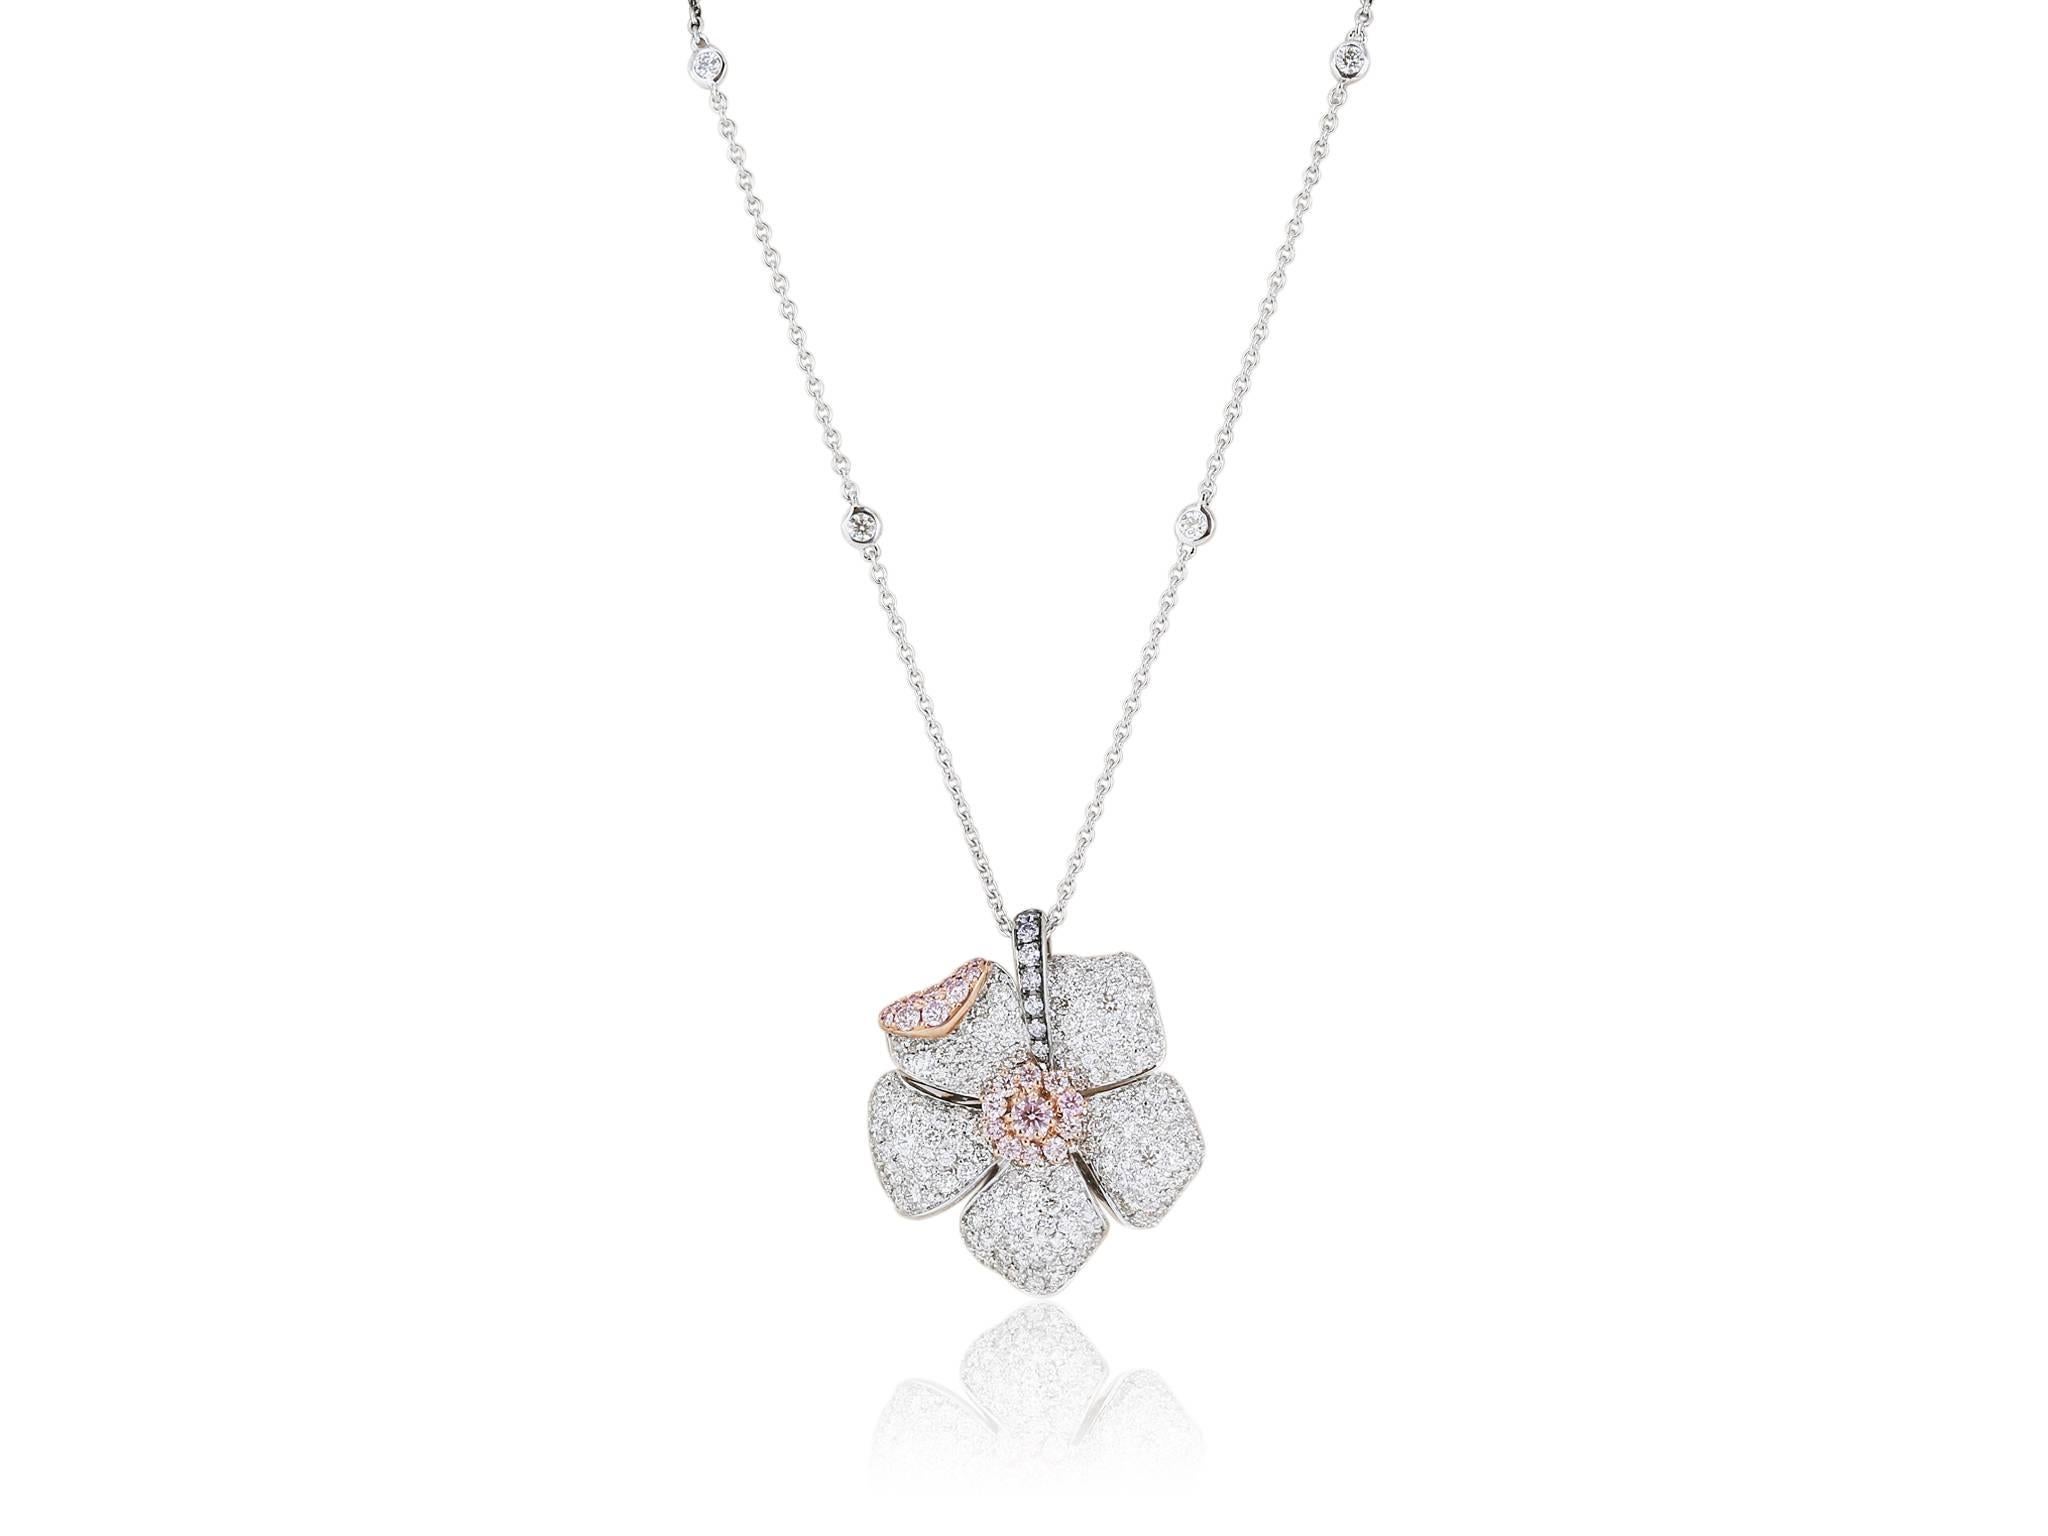 18 karat white gold flower pendant consisting of round Fancy Purplish Pink/Fancy Pink/Fancy Pink diamonds having a total weight of .60 carats, with 7 round Argyle blue diamonds having a total weight of .11 carats and round white diamonds having a